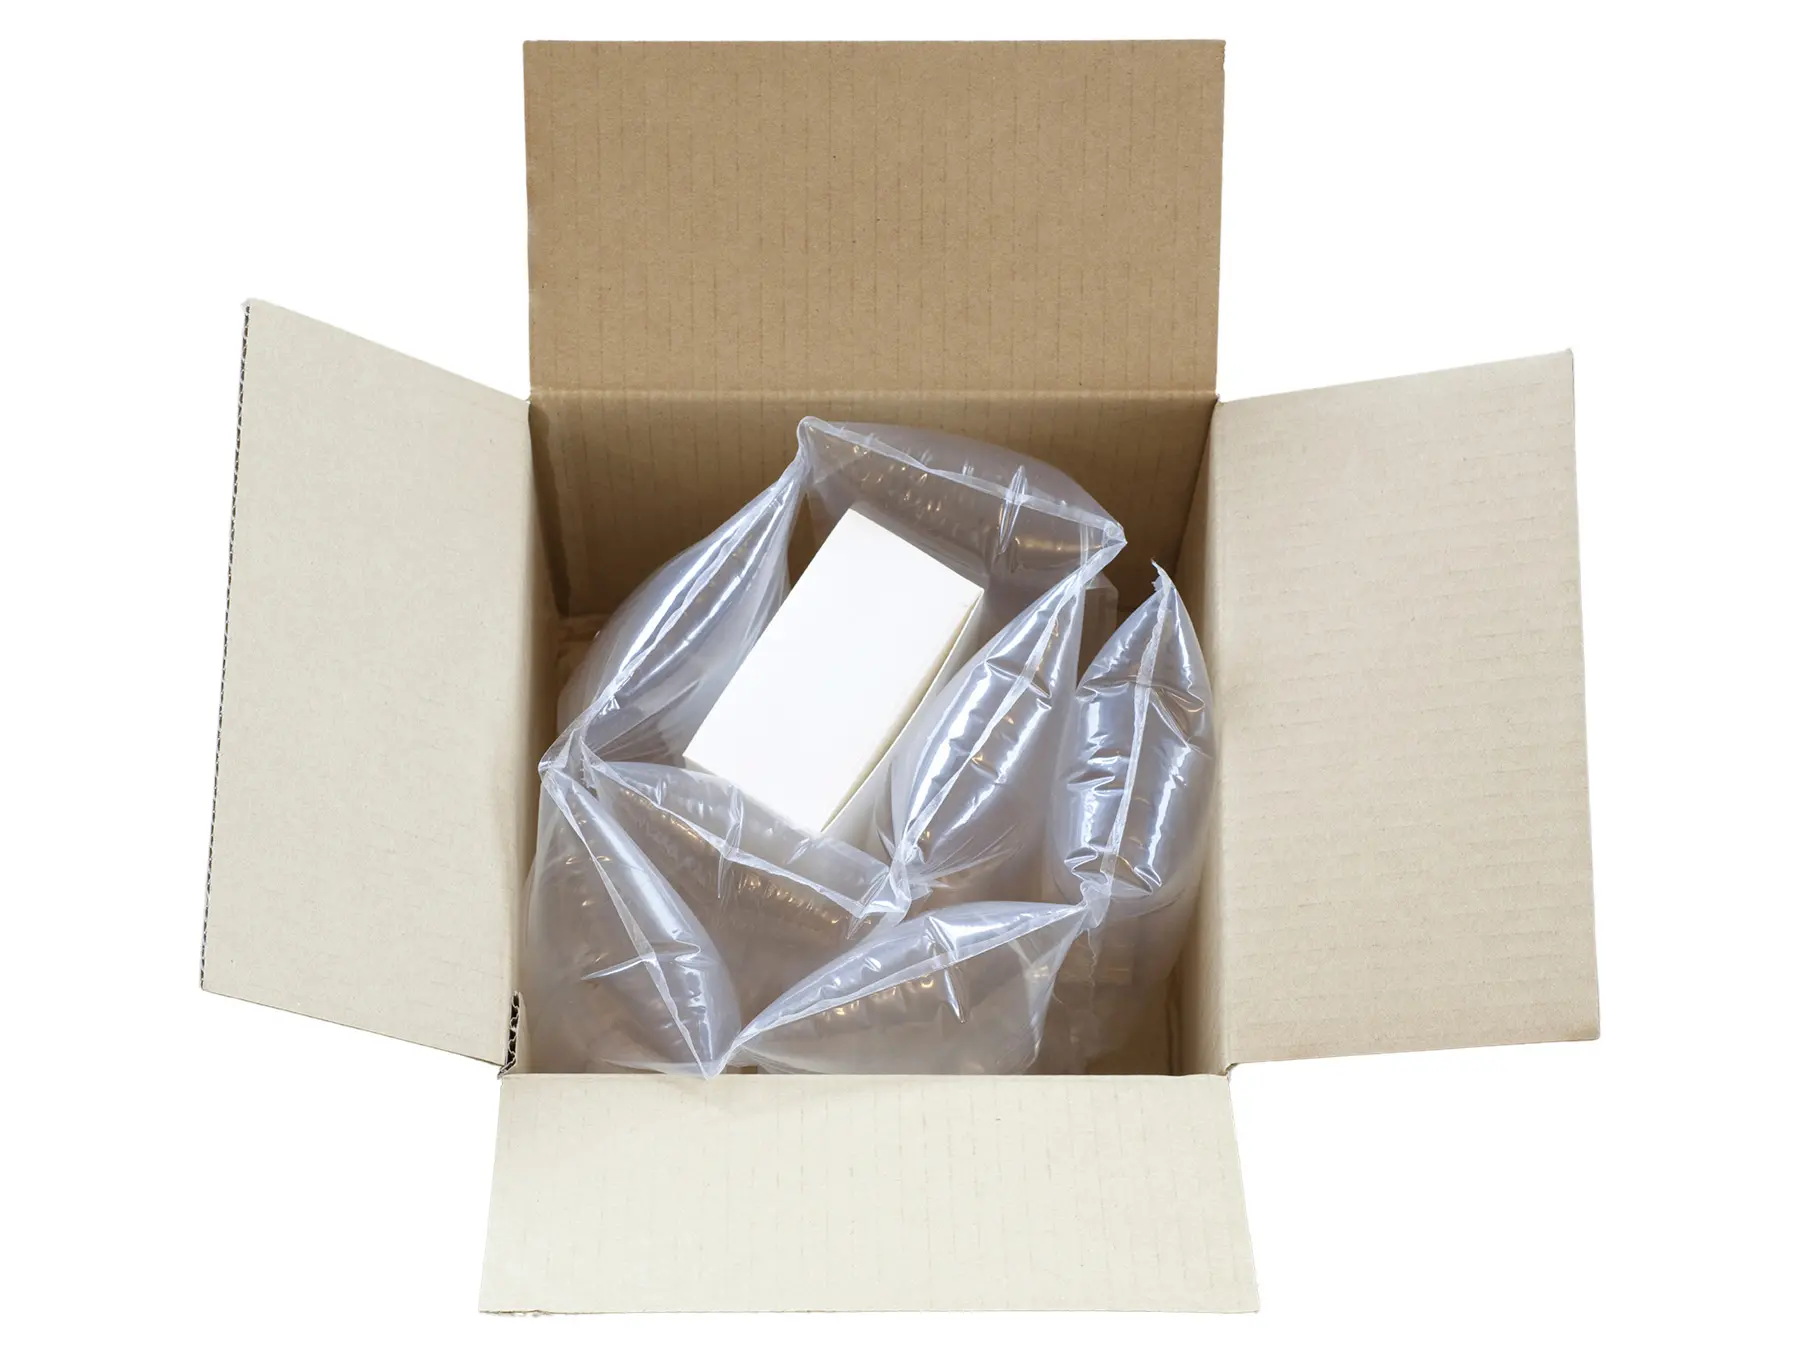 INFLATABLE PACKAGING SYSTEMS